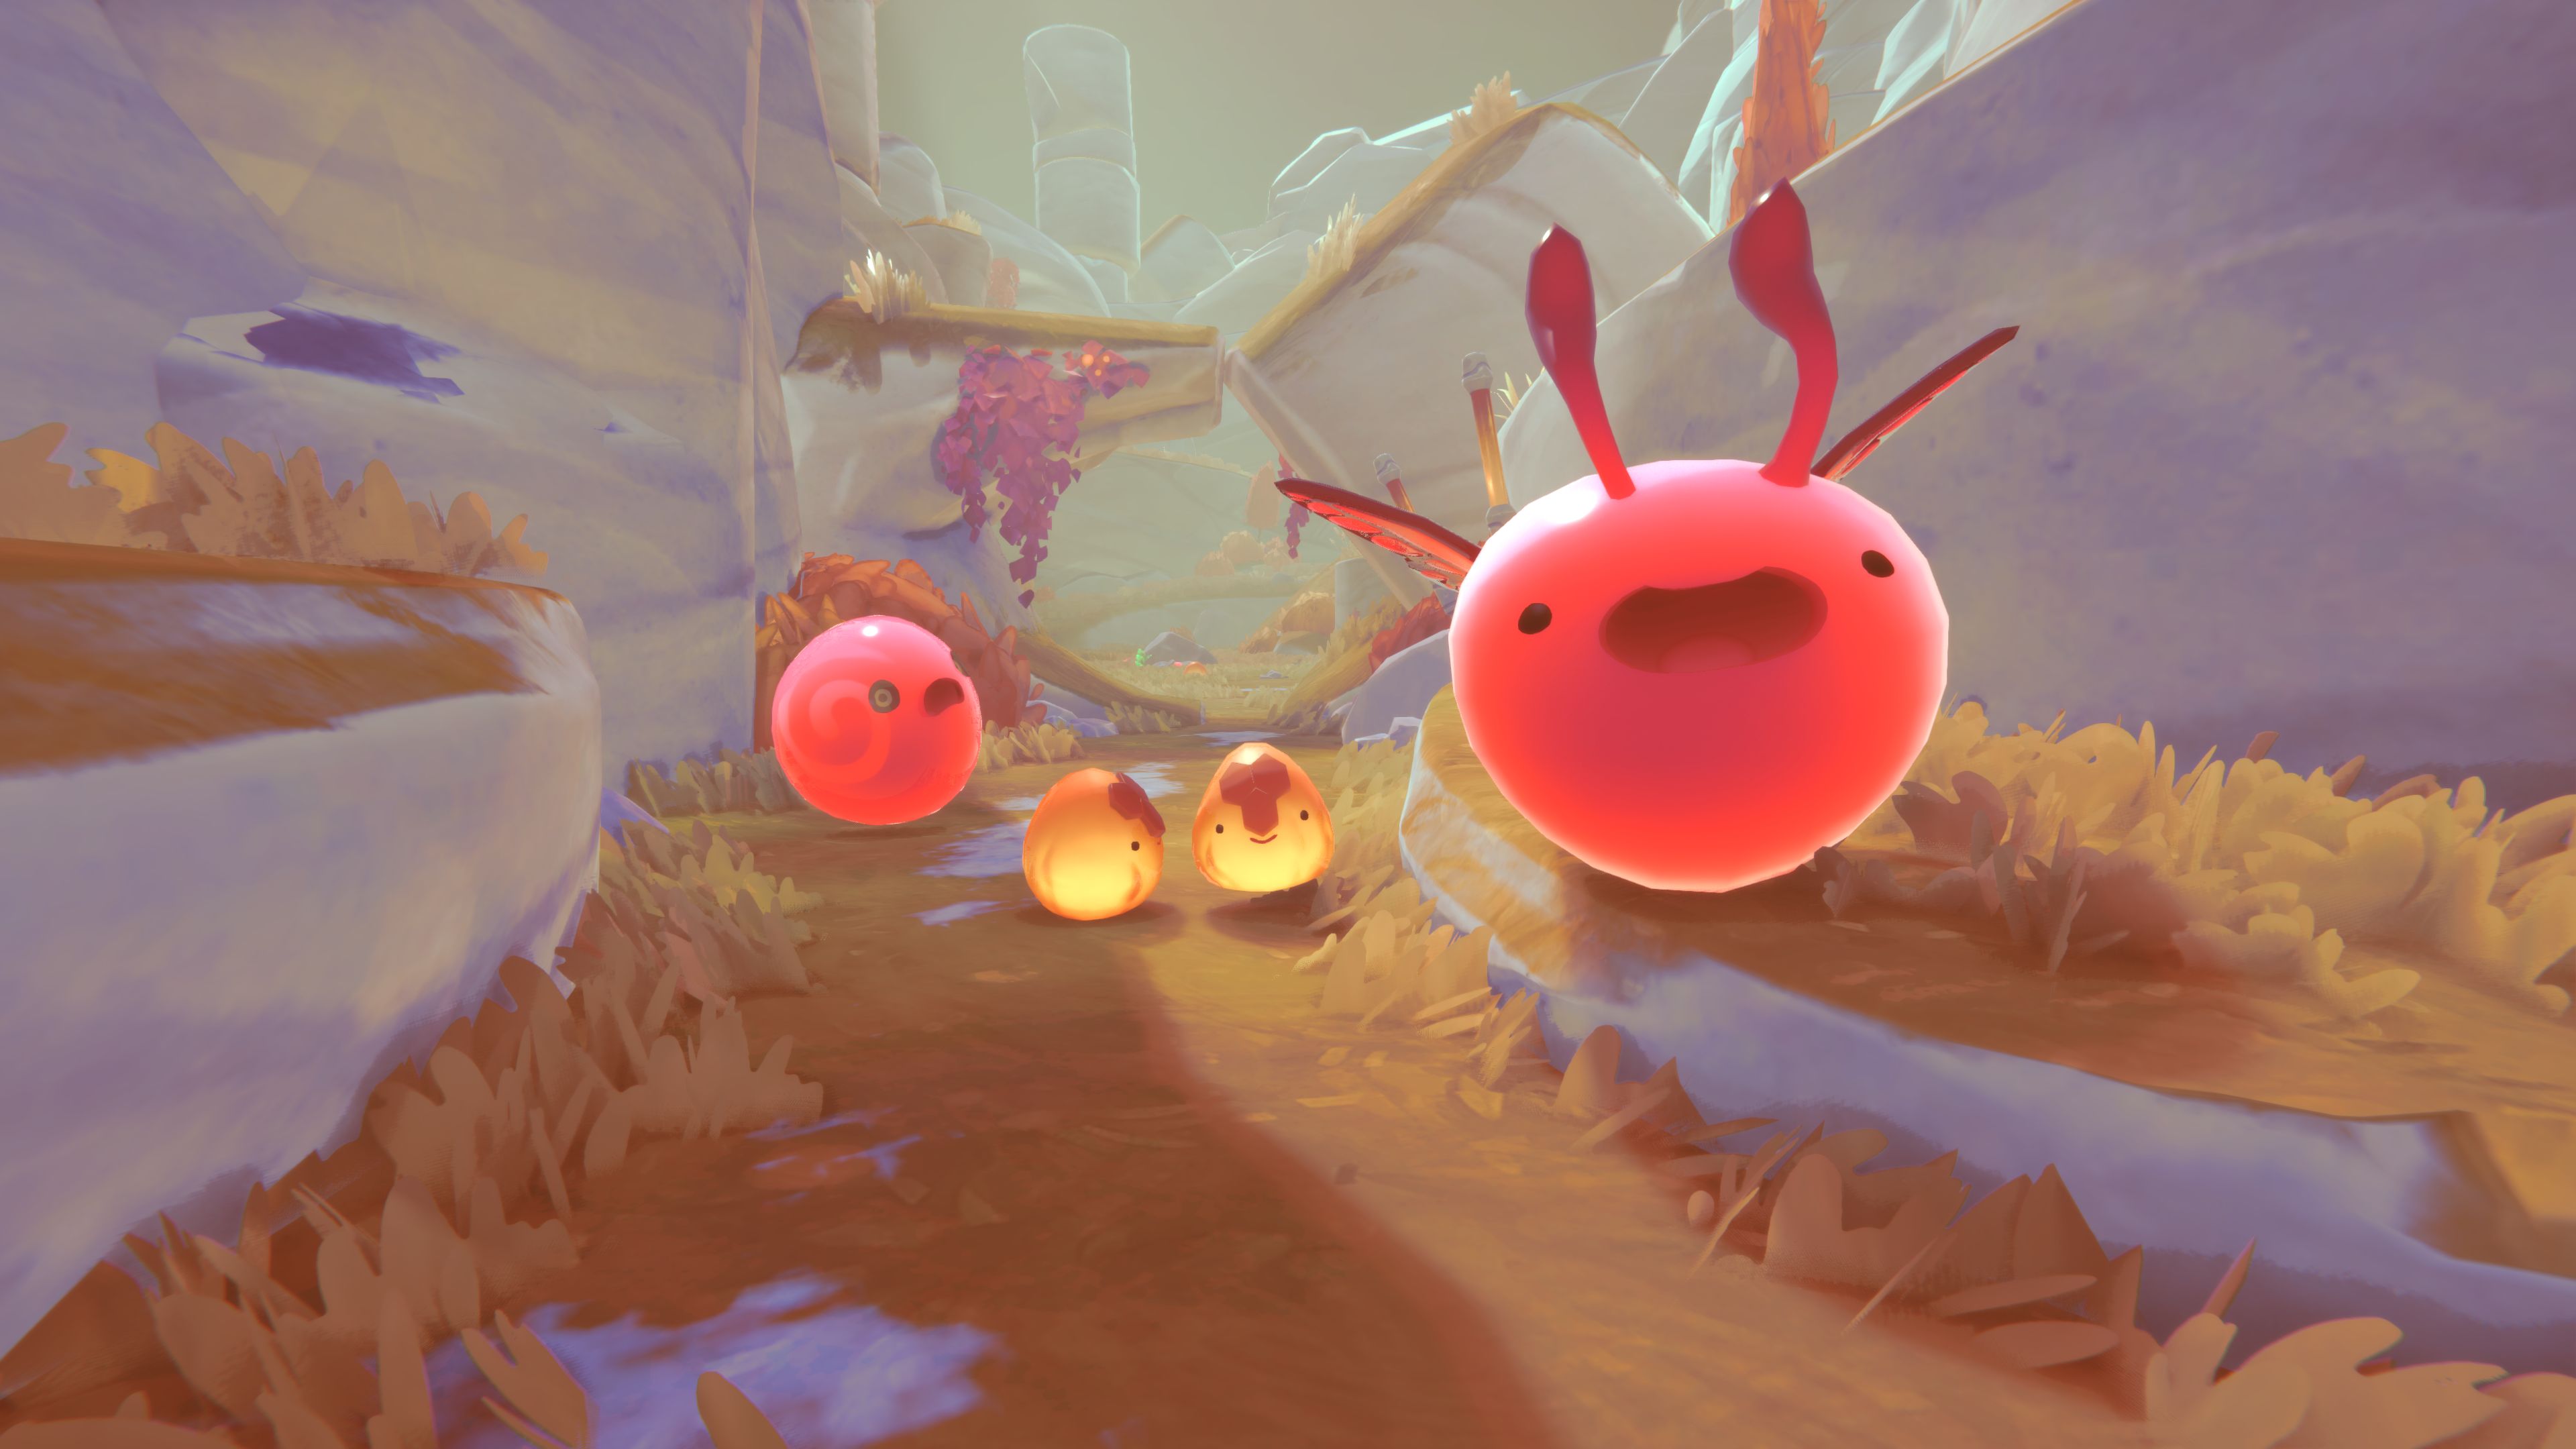 Slime Rancher Wallpapers Apk Download for Android Latest version   comslimeranchercaractersridappwallpaperhd